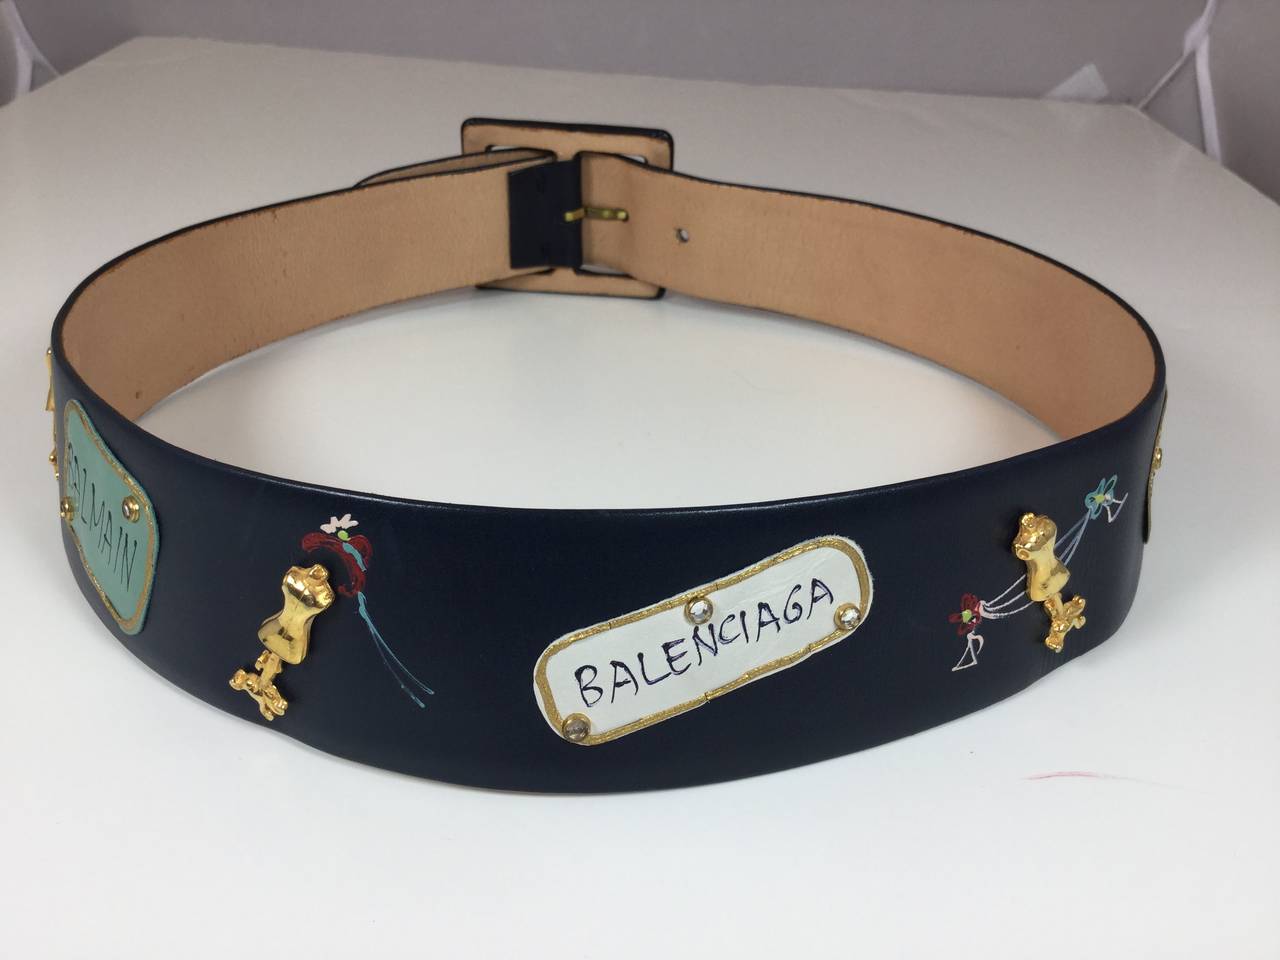 This delightful navy blue belt is decorated with tributes to all the major fashion houses of the day.  Each hand painted leather plaque is decorated with a designer name.  We have Dior, Fath, Balenciaga, Givenchy, and Balmain. The name plaques are